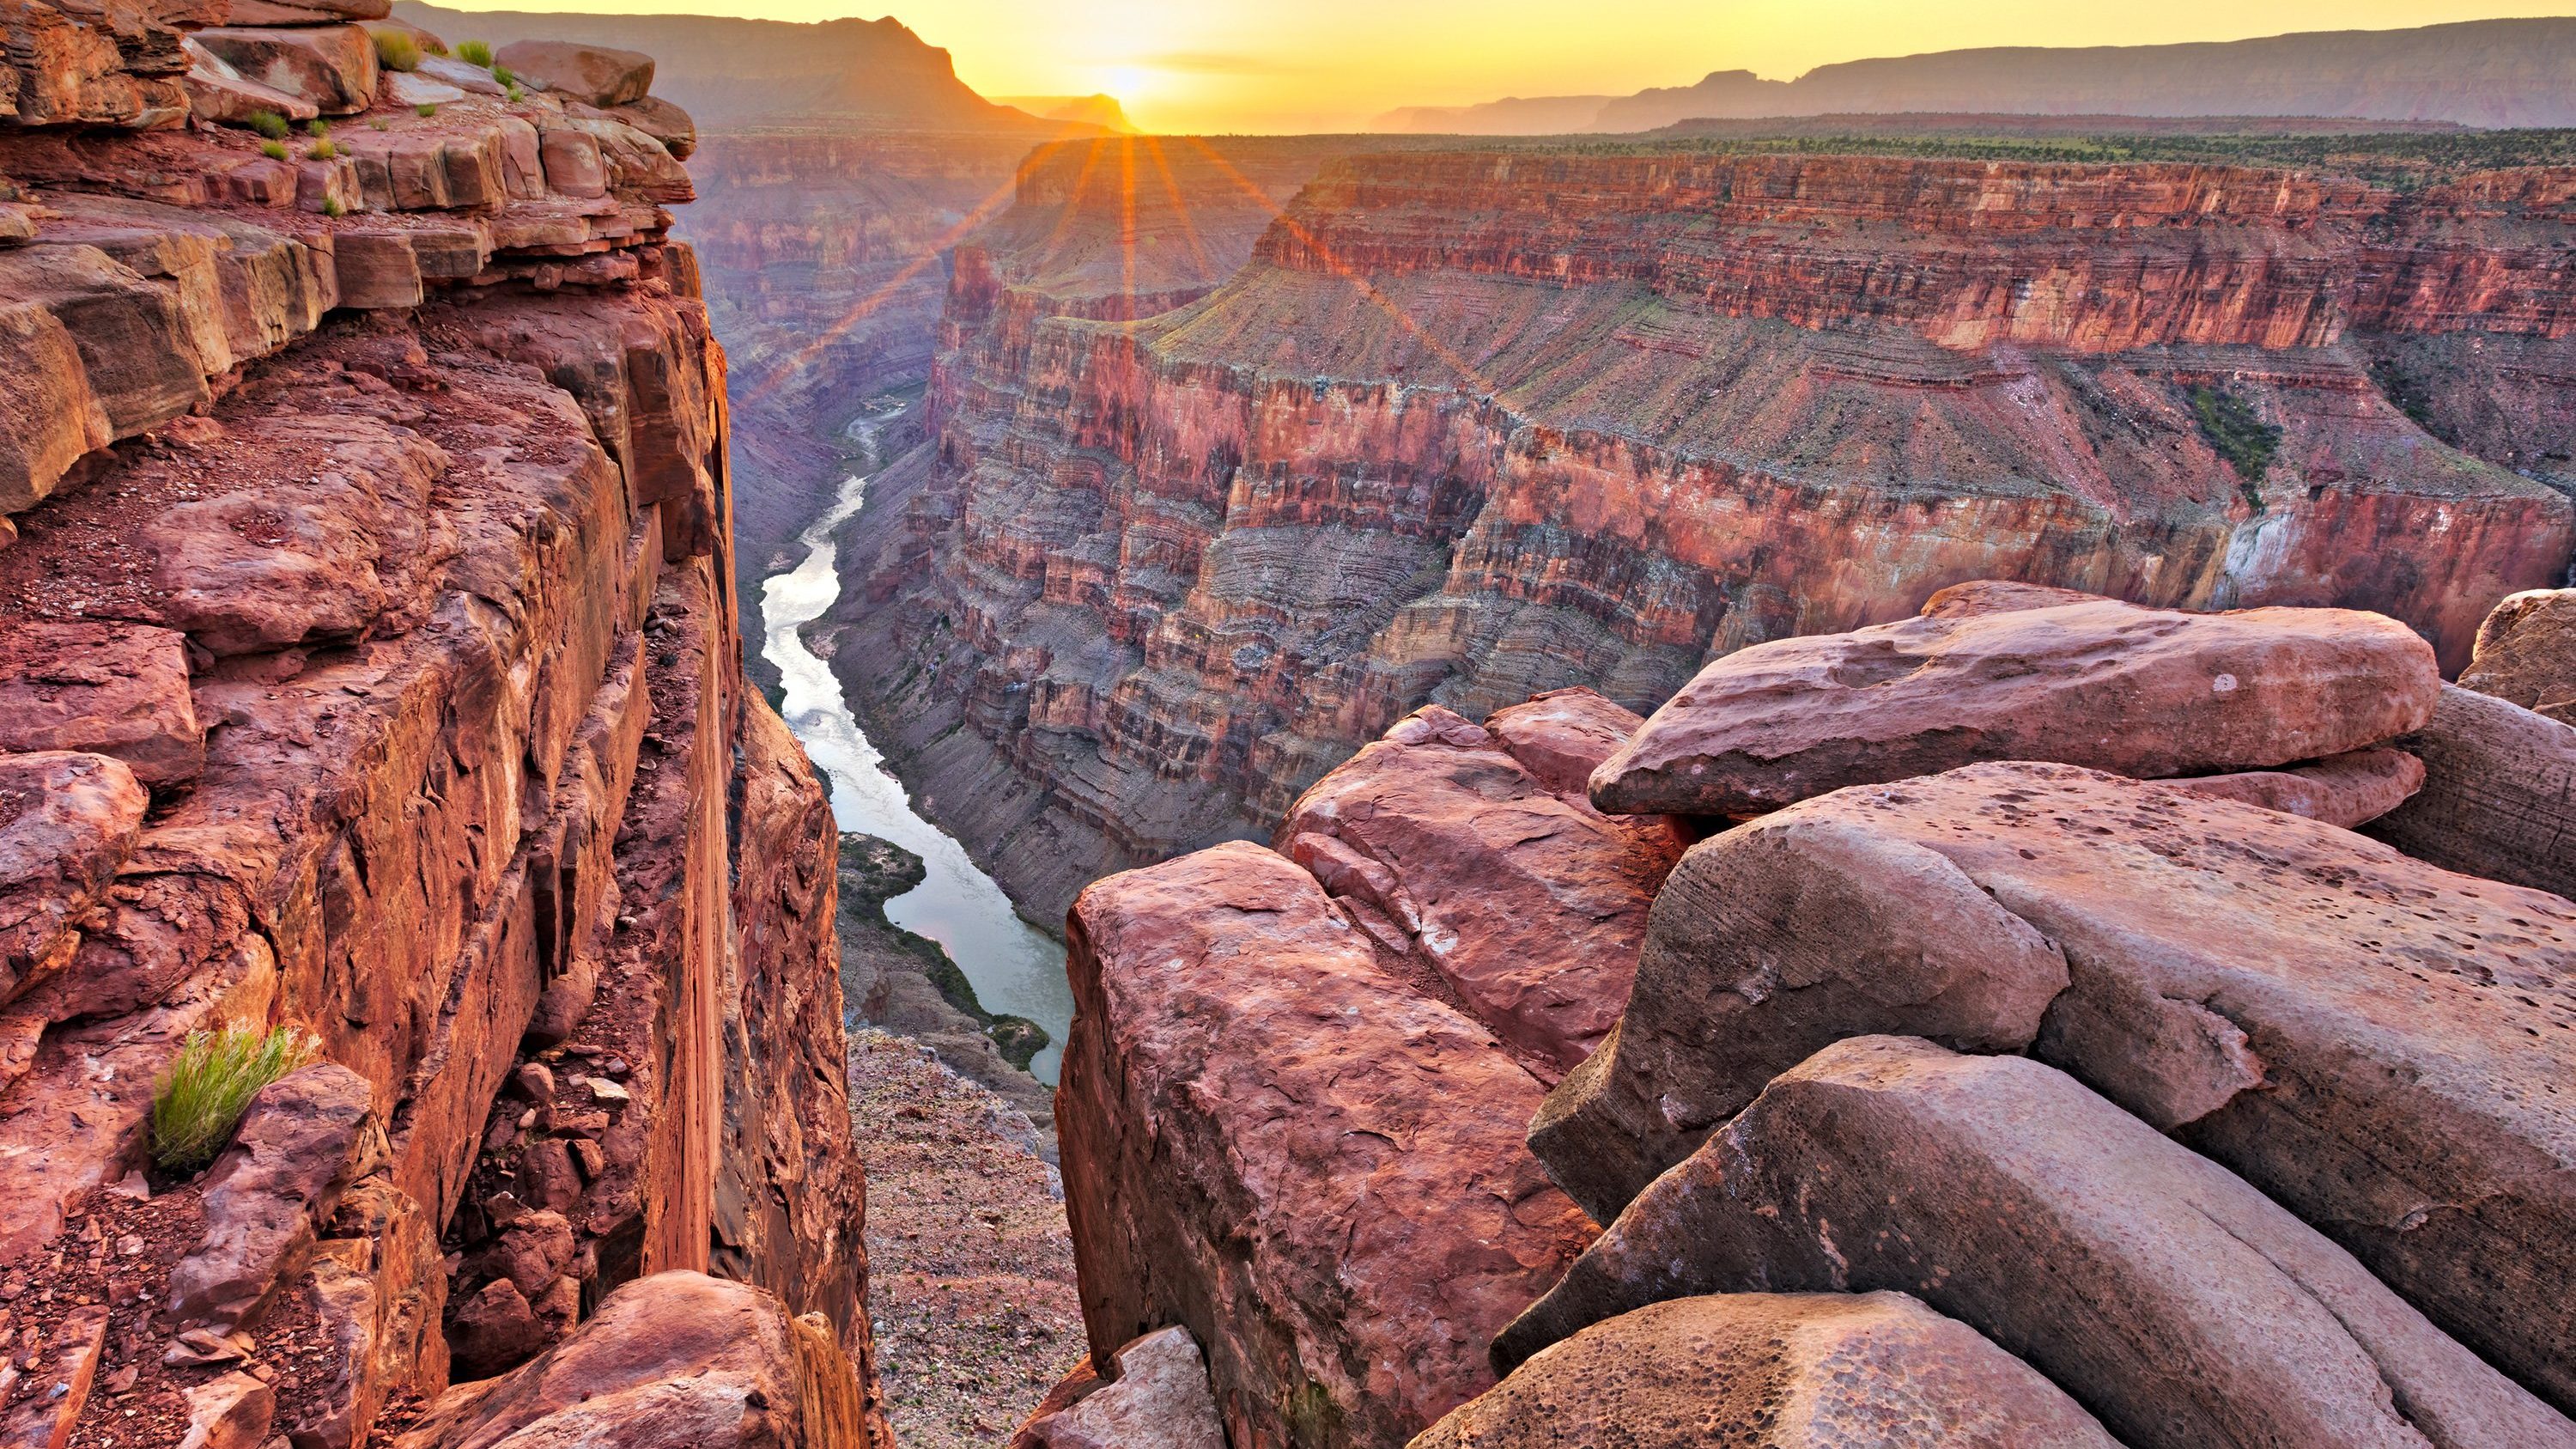 A 41-year-old woman from Canada died Thursday, June 2, 2022 at Grand Canyon National Park....